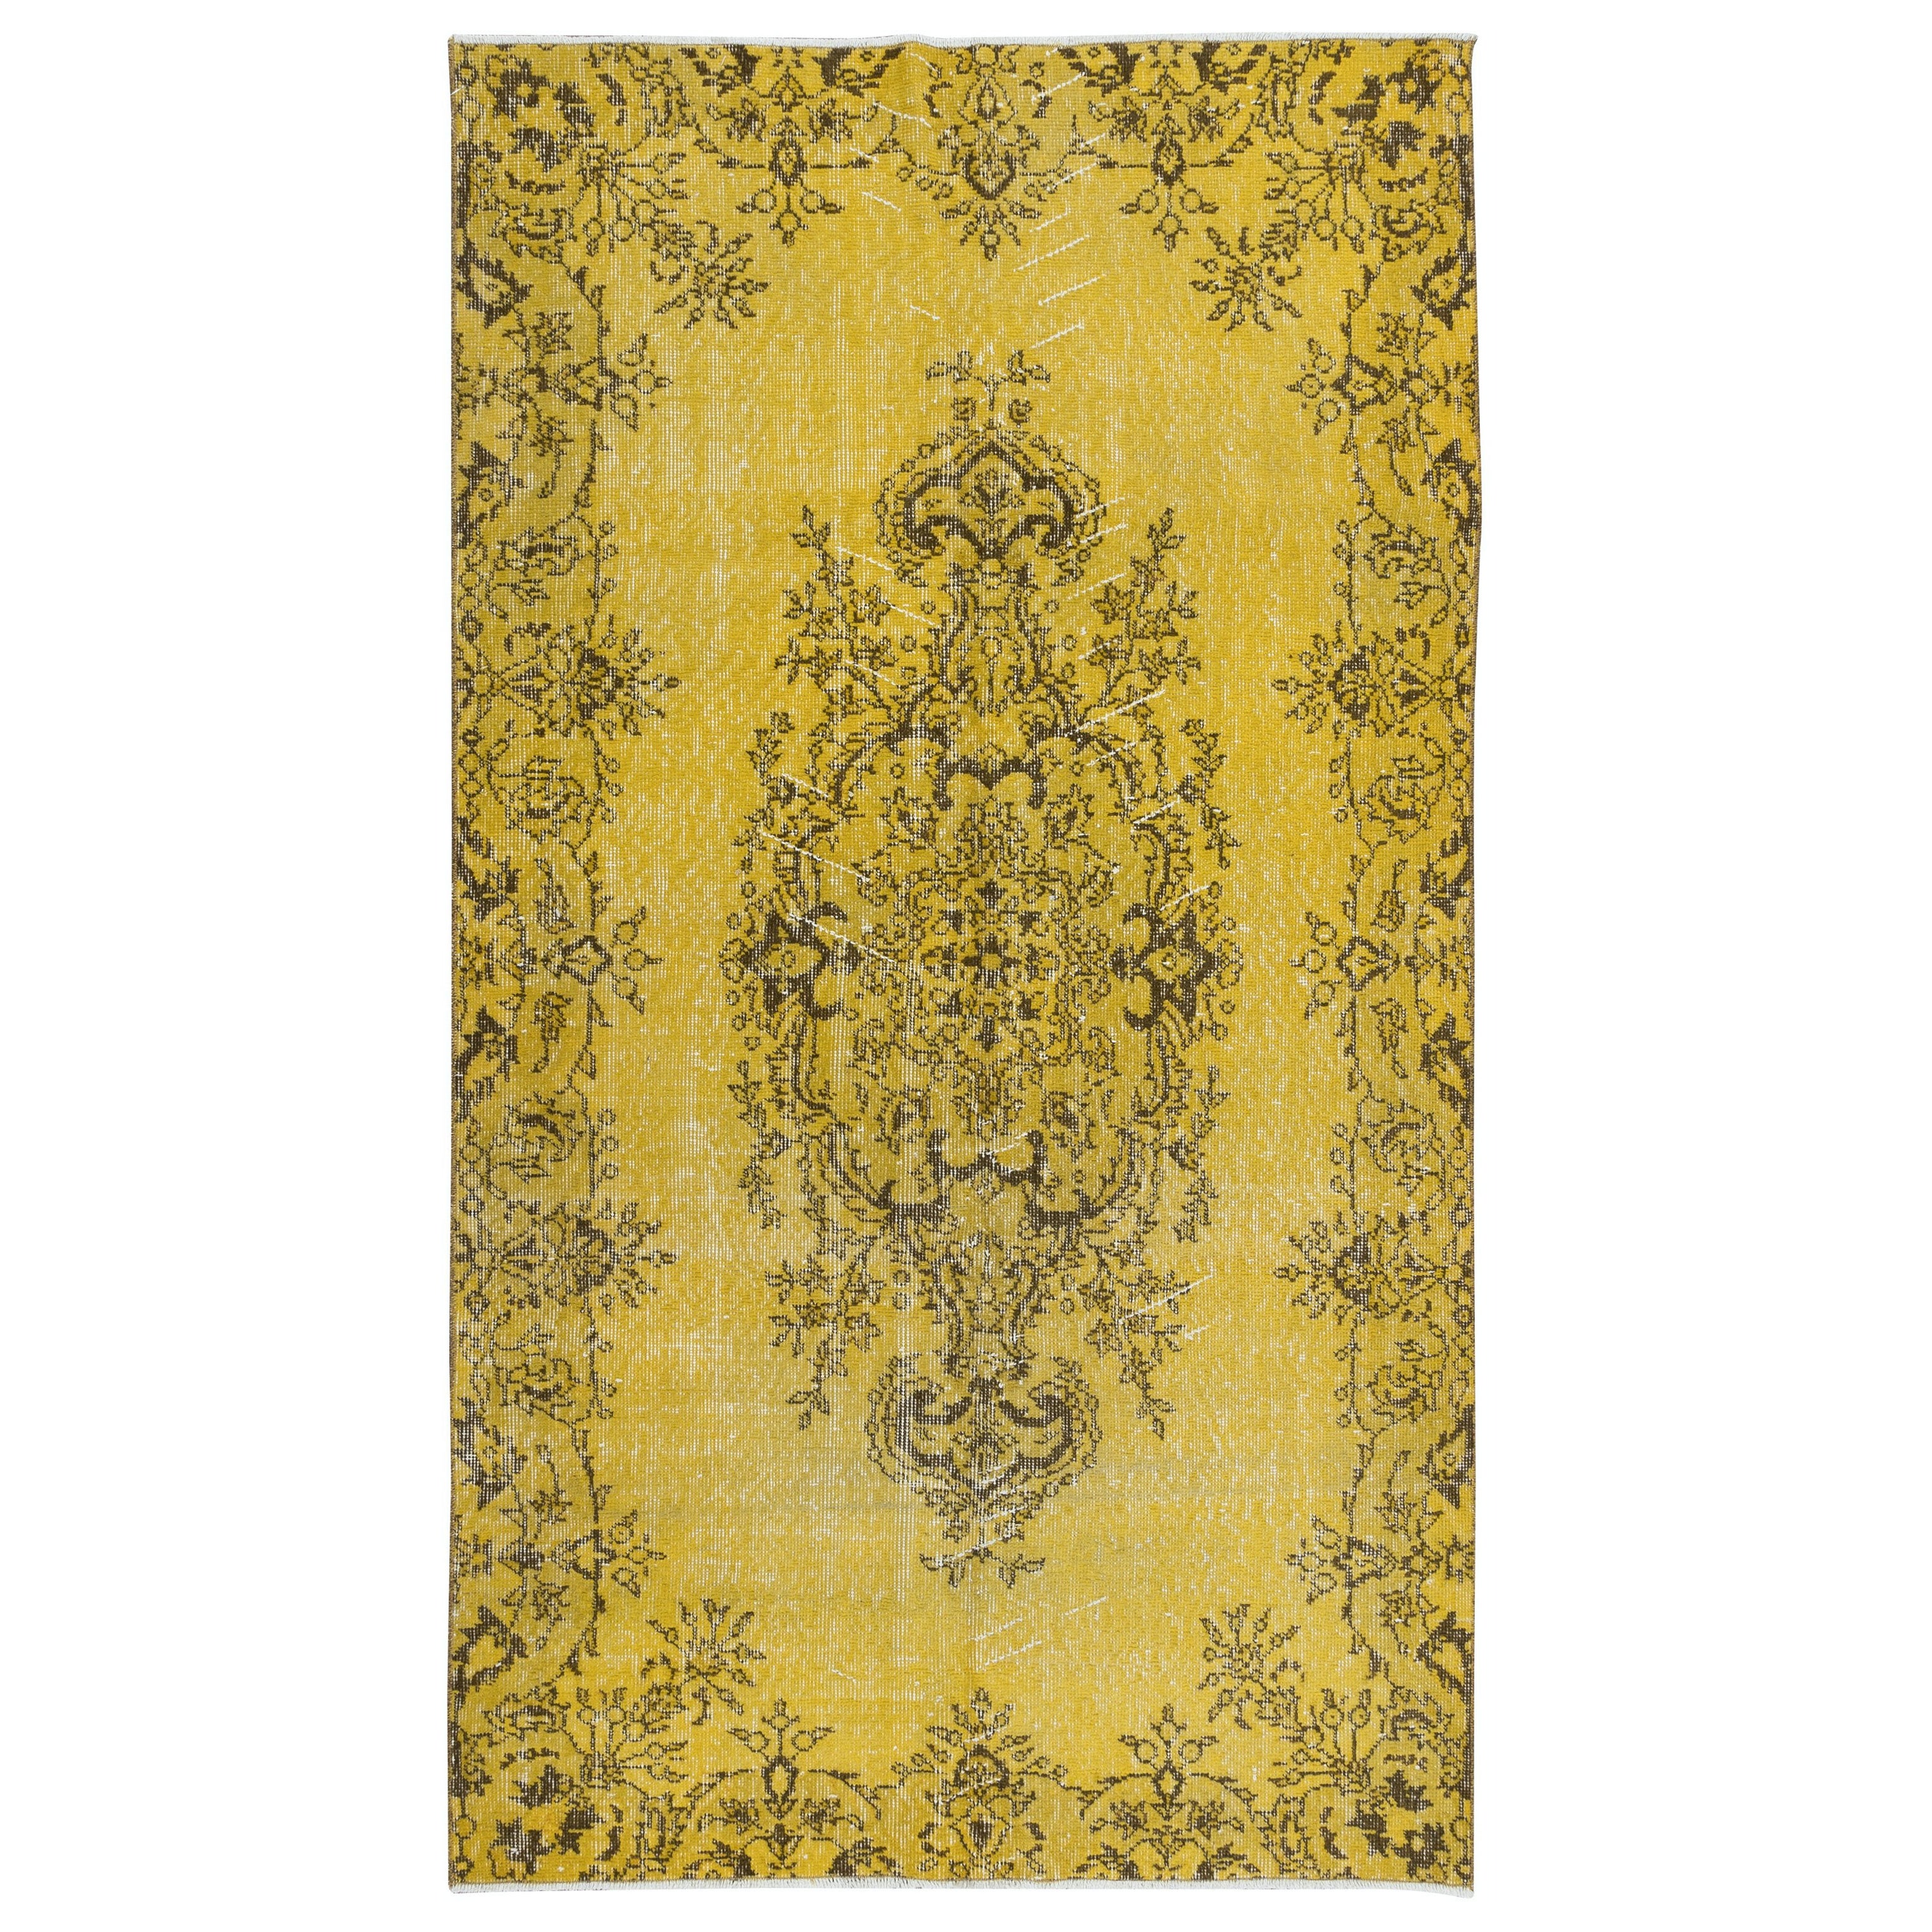 4x7 Ft Authentic Handmade Turkish Rug Over-Dyed in Yellow, Vintage Carpet